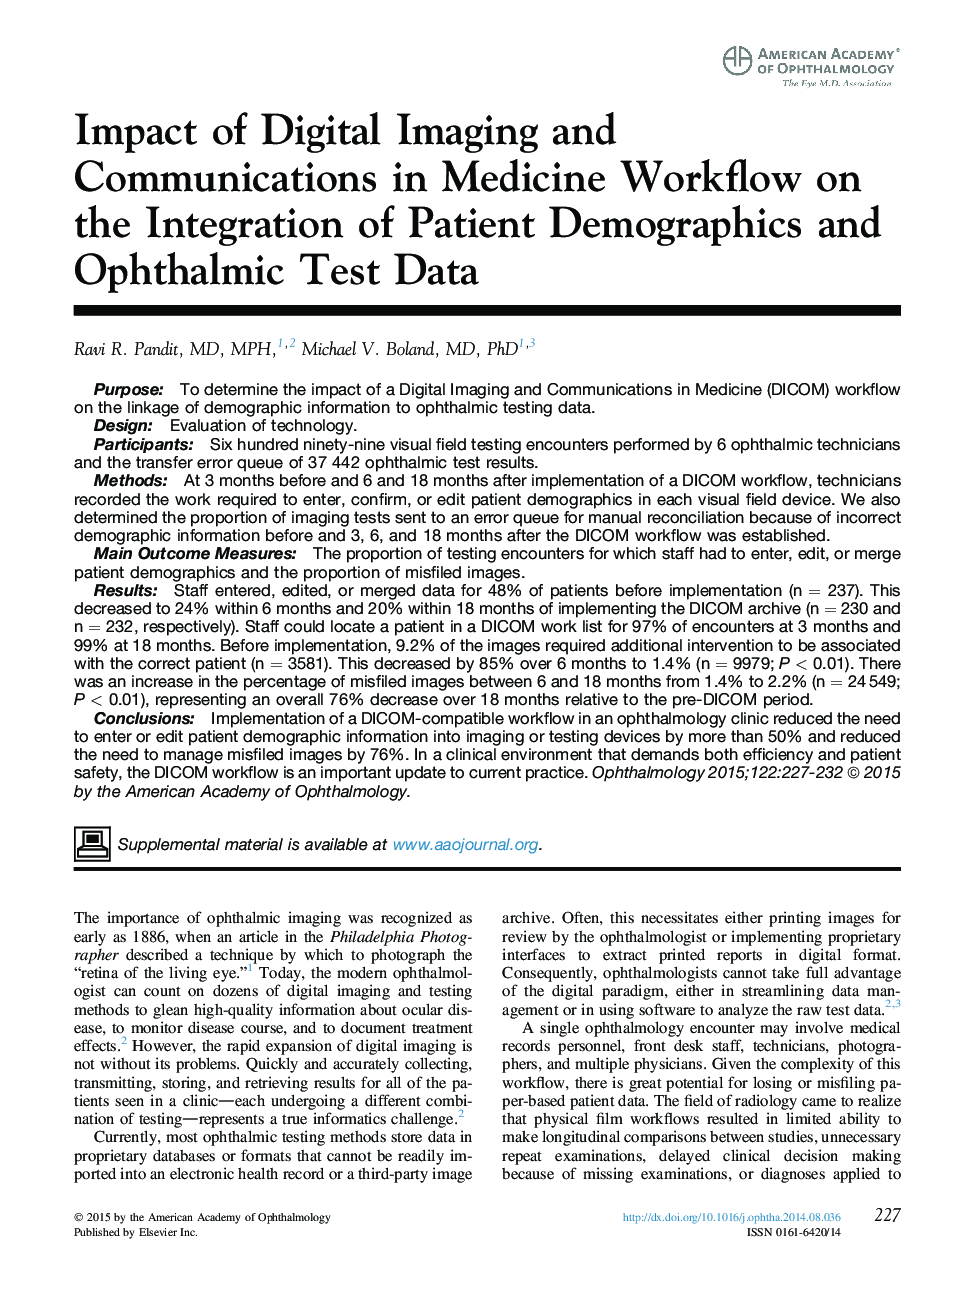 Impact of Digital Imaging and Communications in Medicine Workflow on the Integration of Patient Demographics and Ophthalmic Test Data